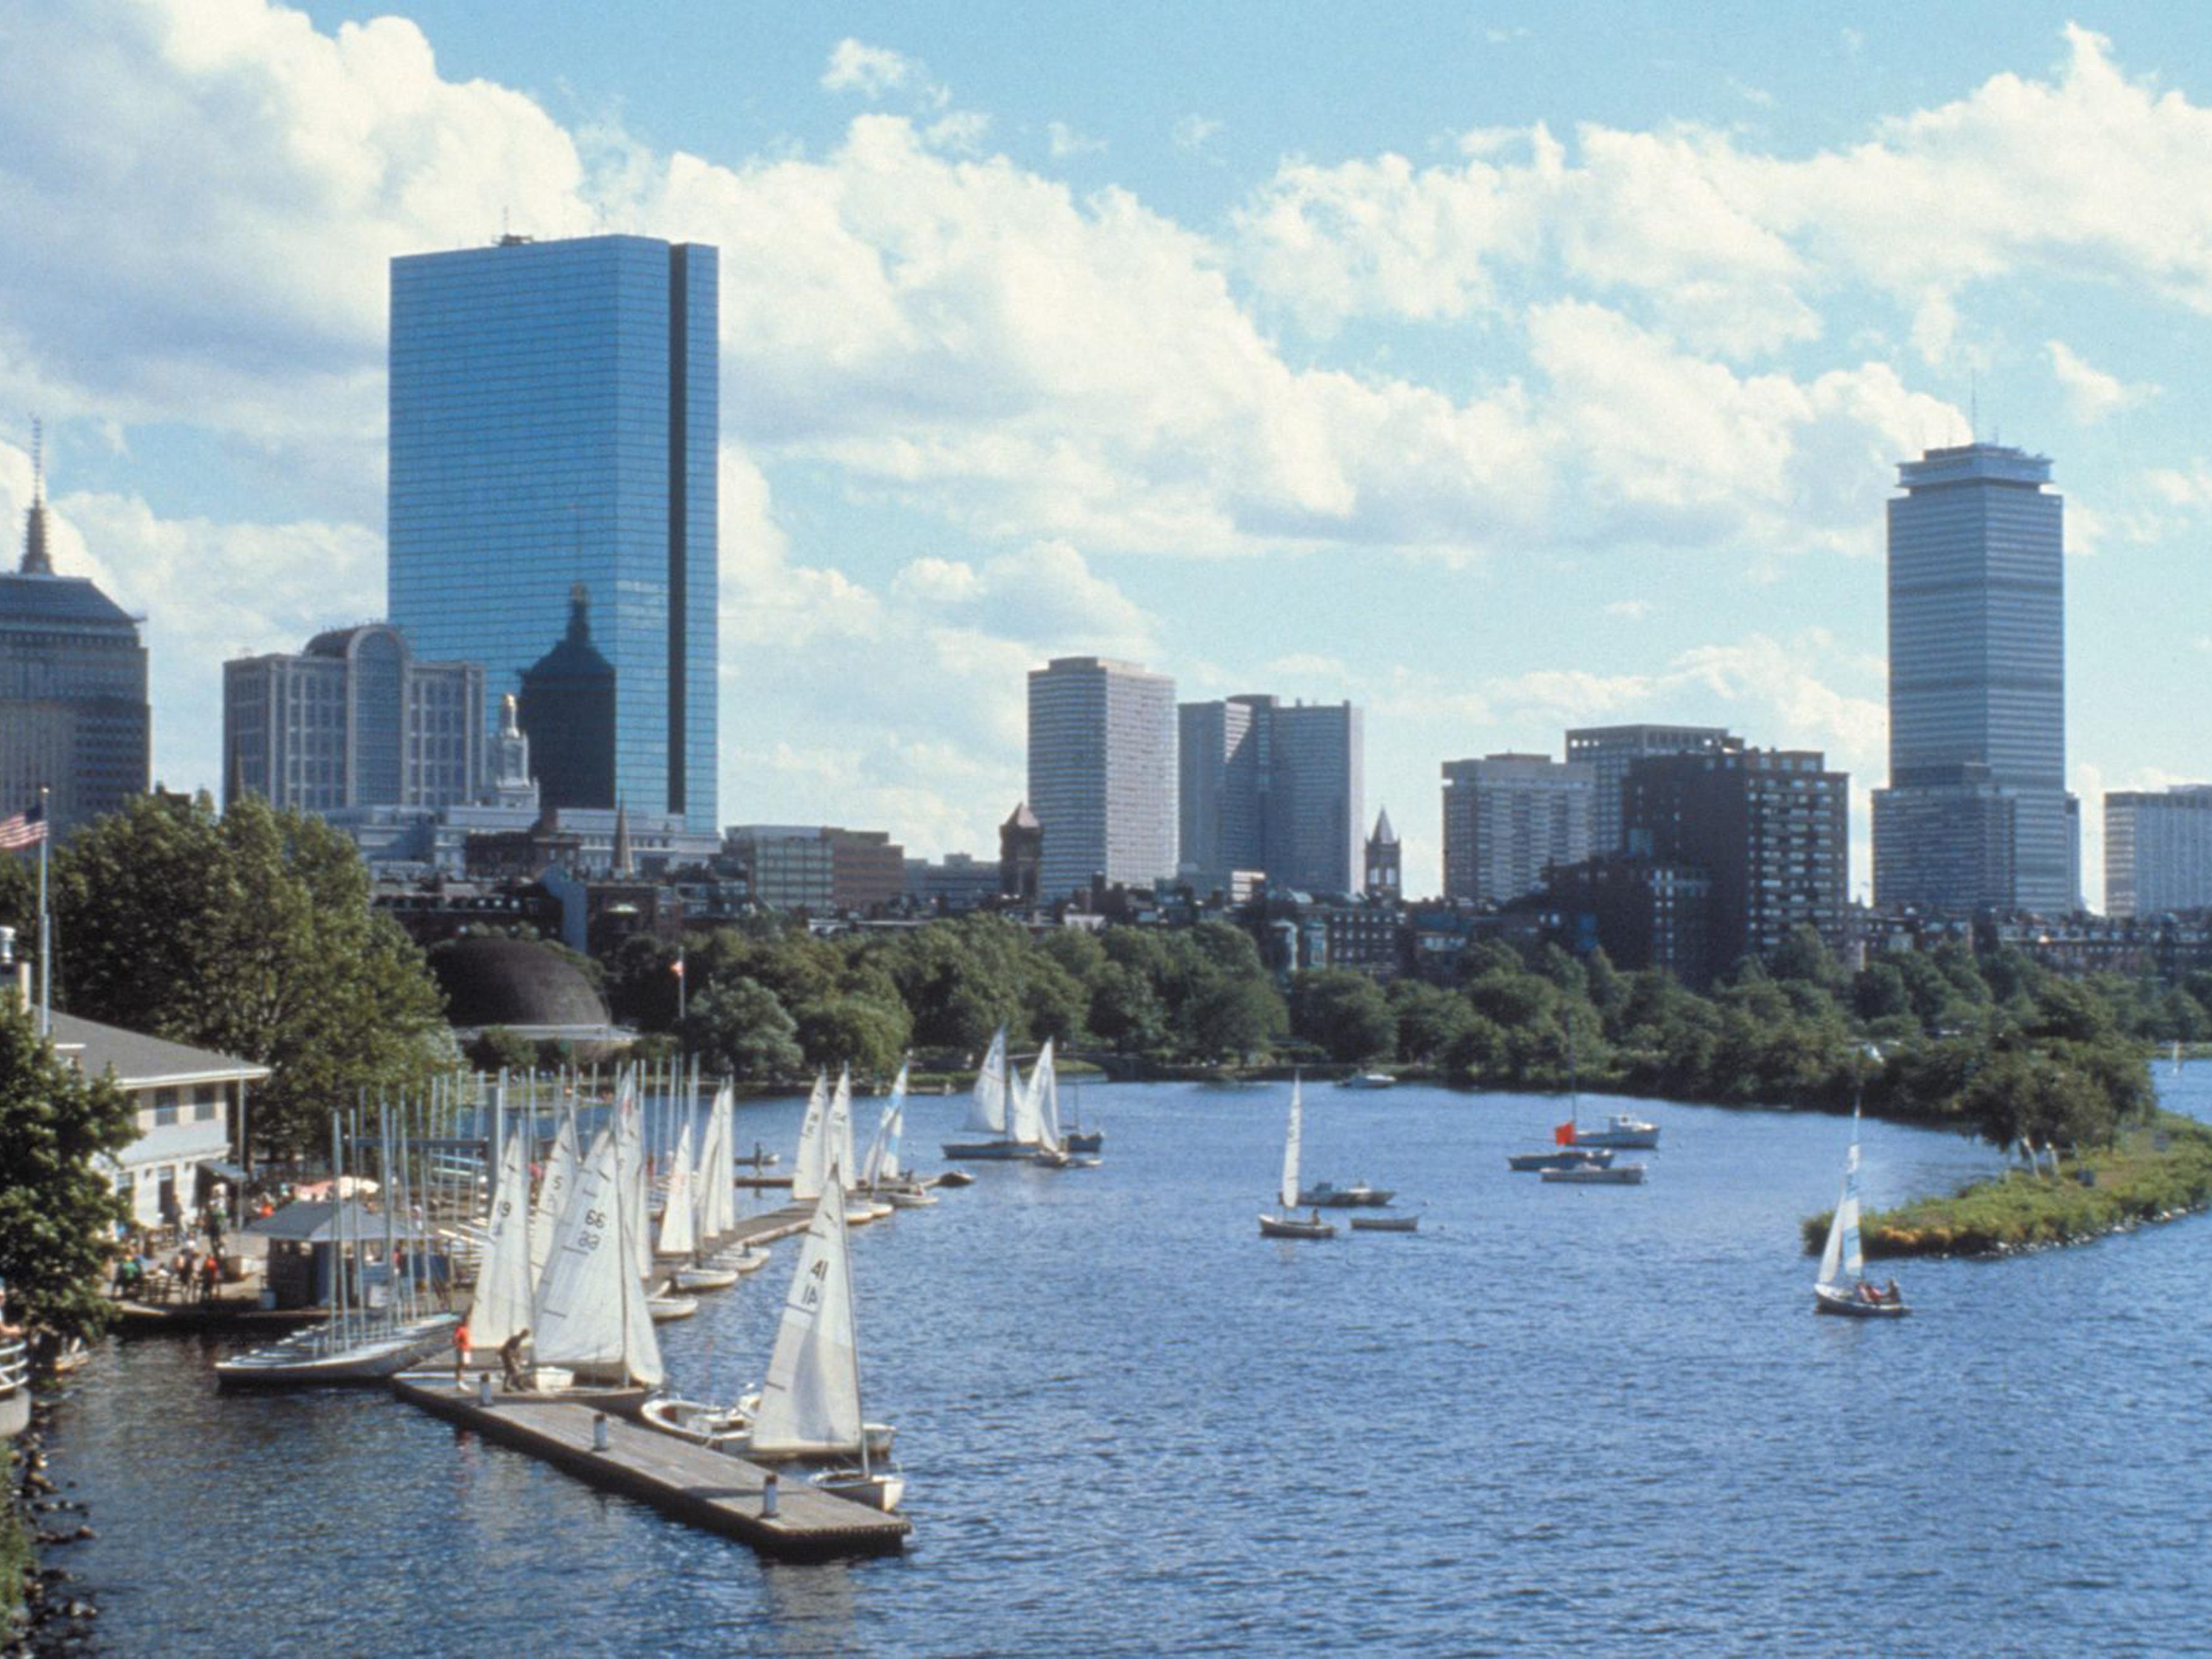 History repeats itself as Boston commences the 250th anniversary of the Boston Tea Party. Come stay with us and experience all the upcoming historical celebrations like special exhibits, theatrical performances, historical festivals, and much more fun.